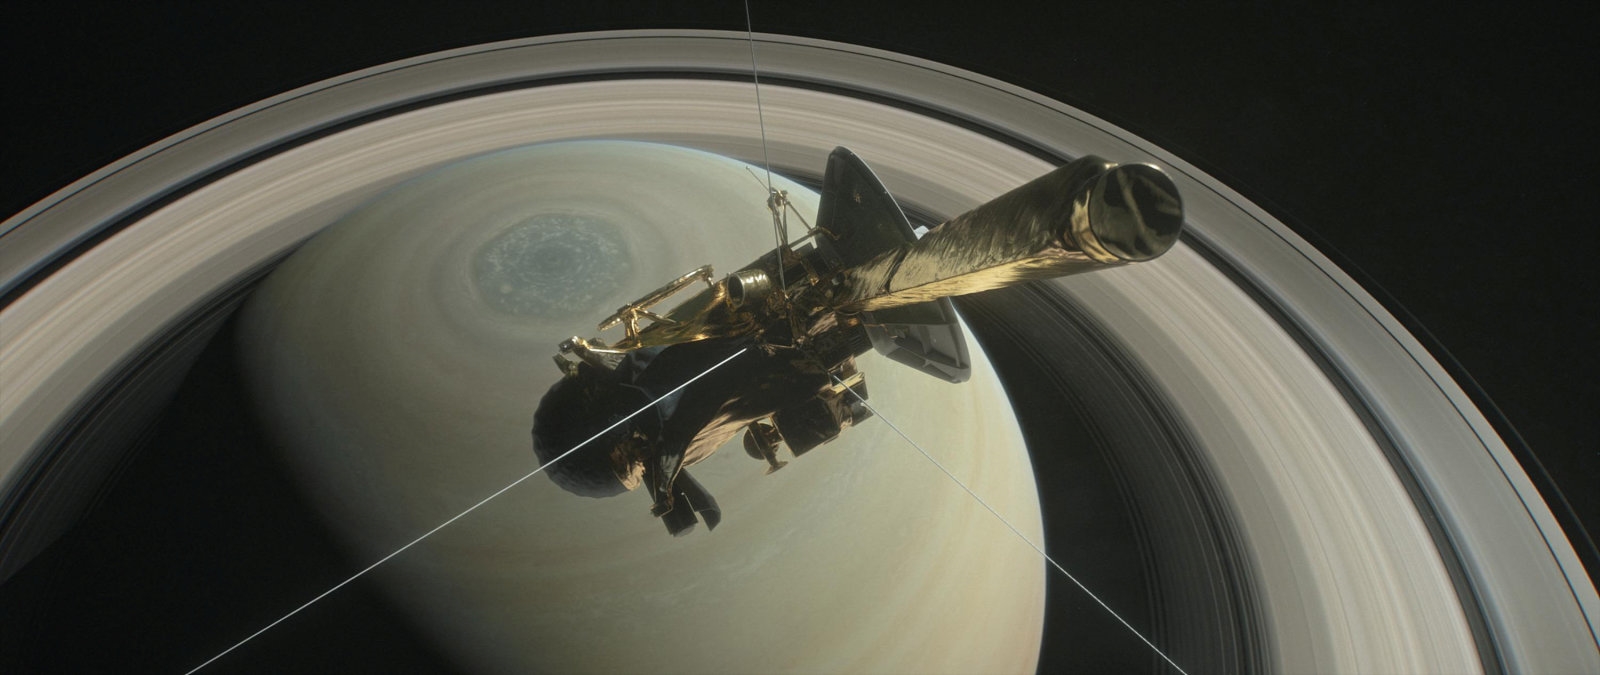 Recommended Reading: Why Cassini had to be destroyed | DeviceDaily.com